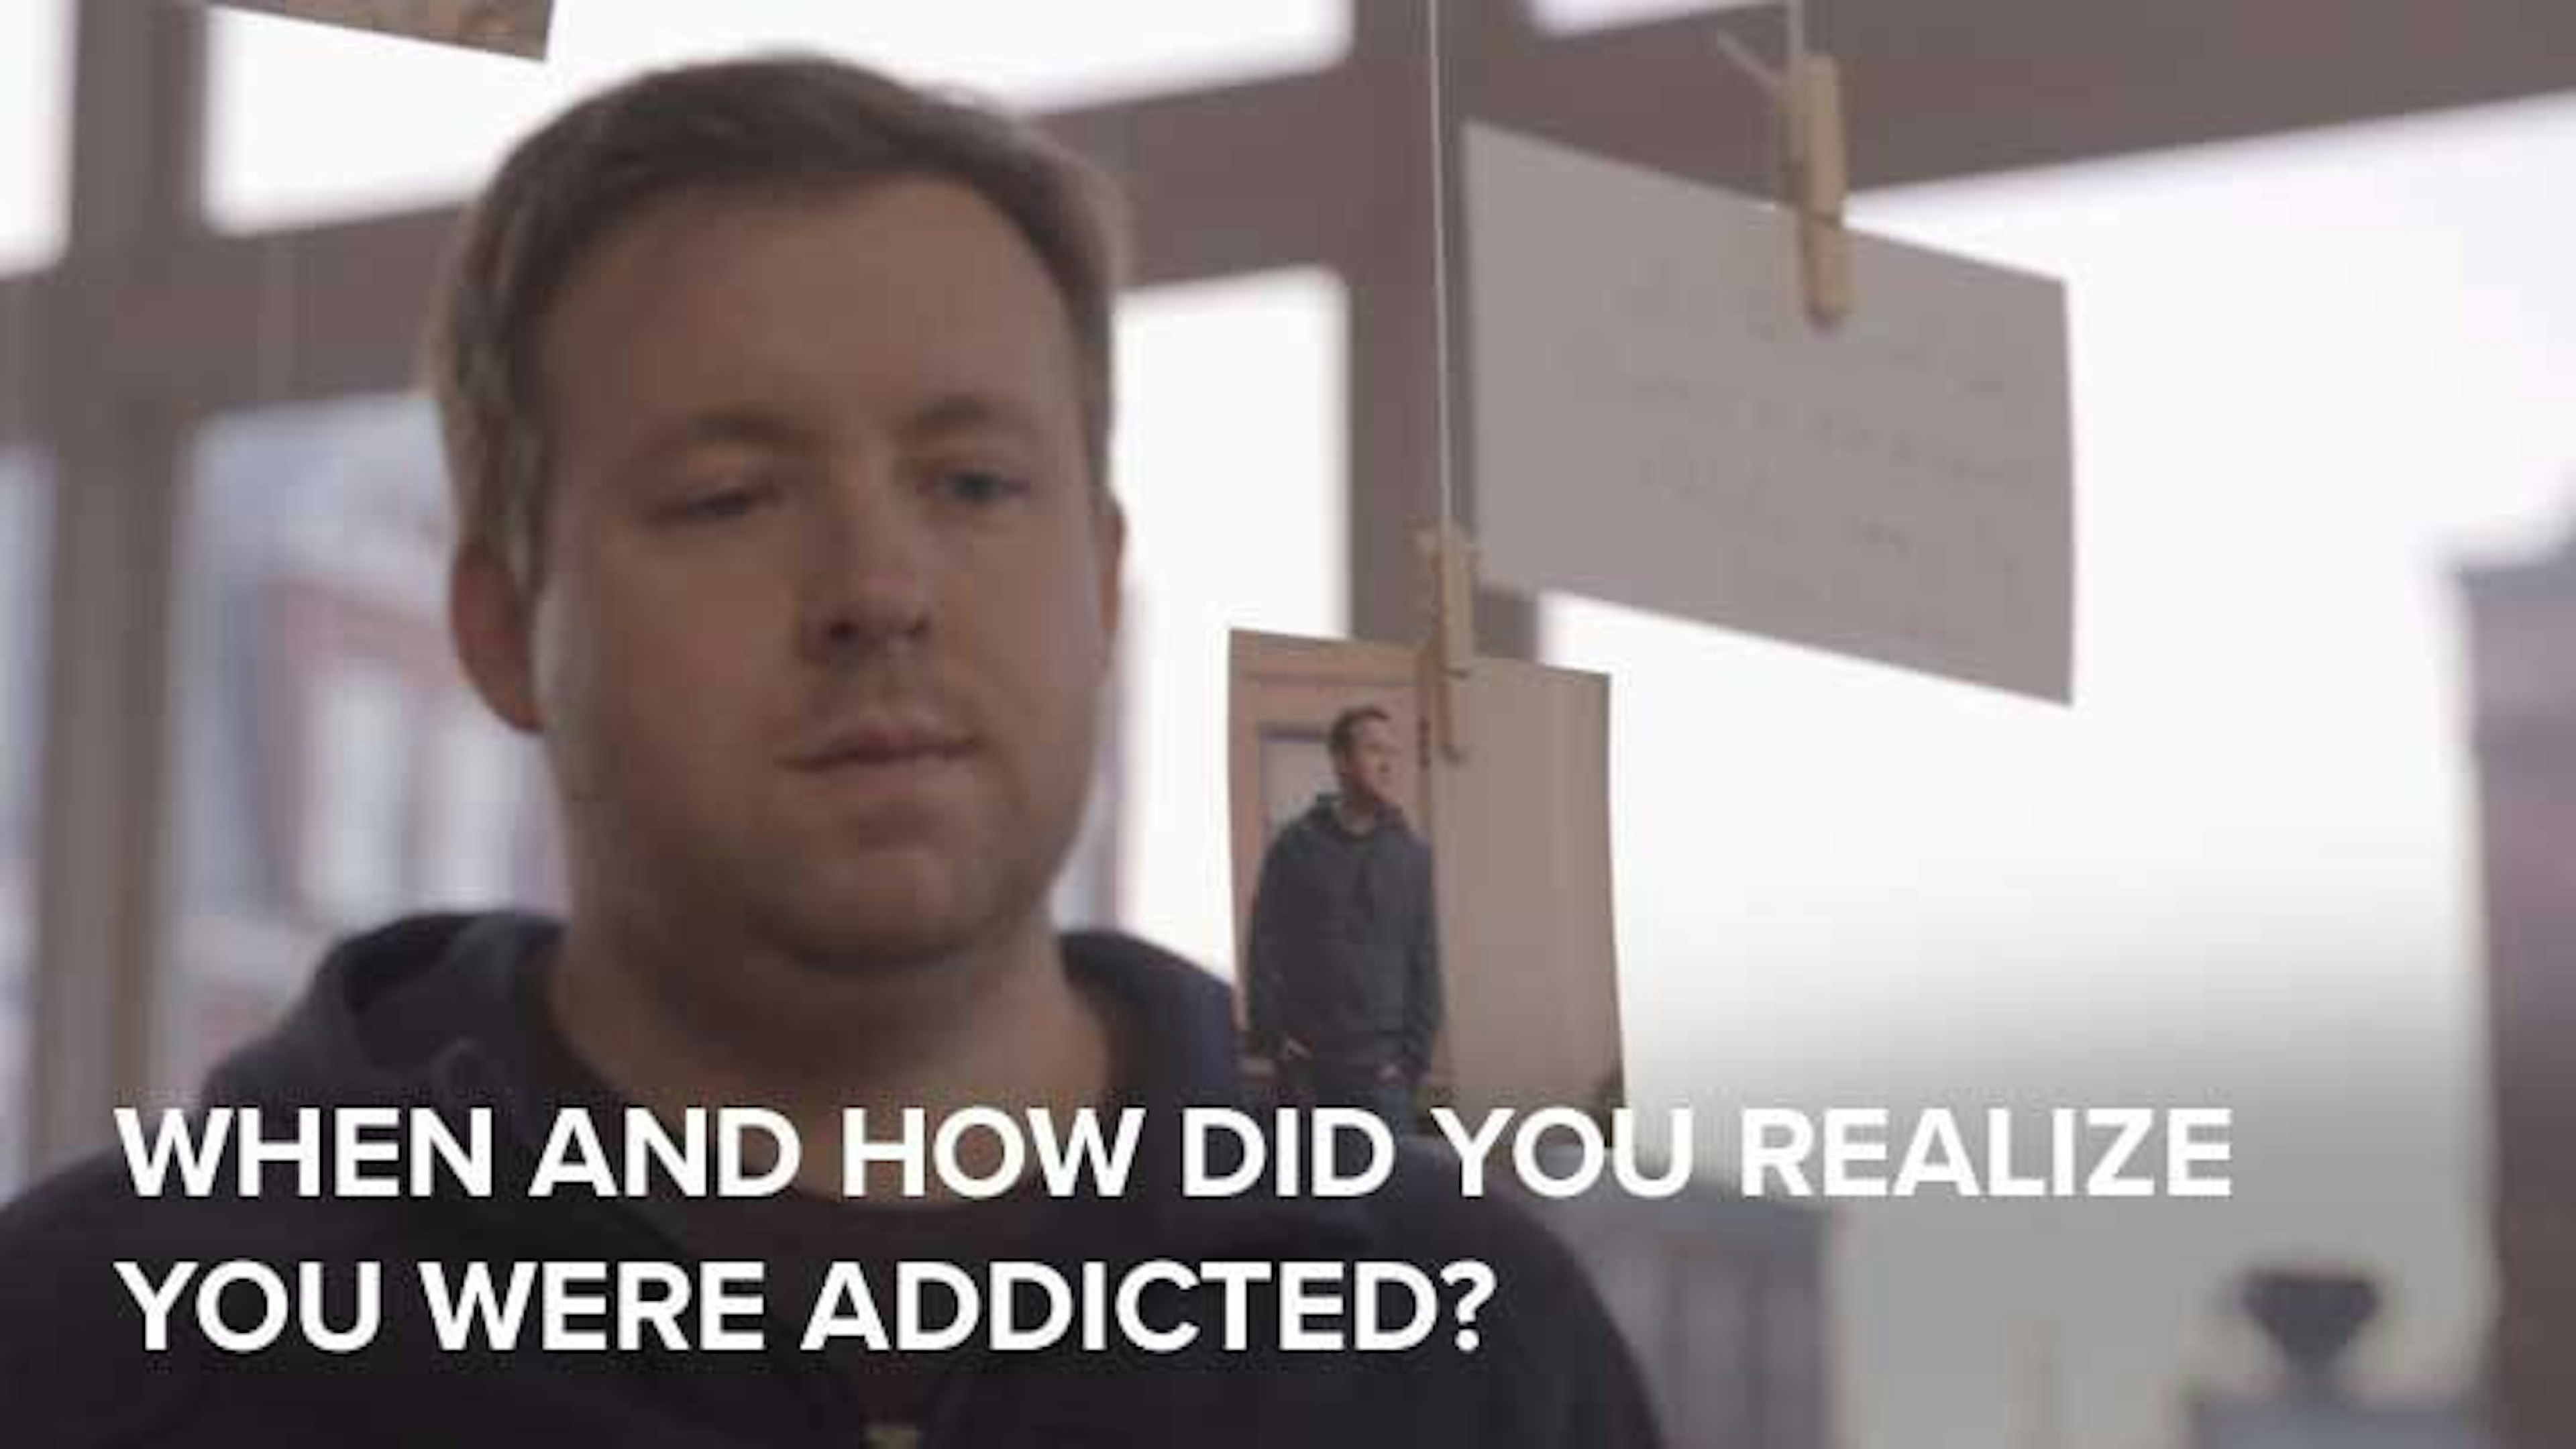 When and how did you realize you were addicted?